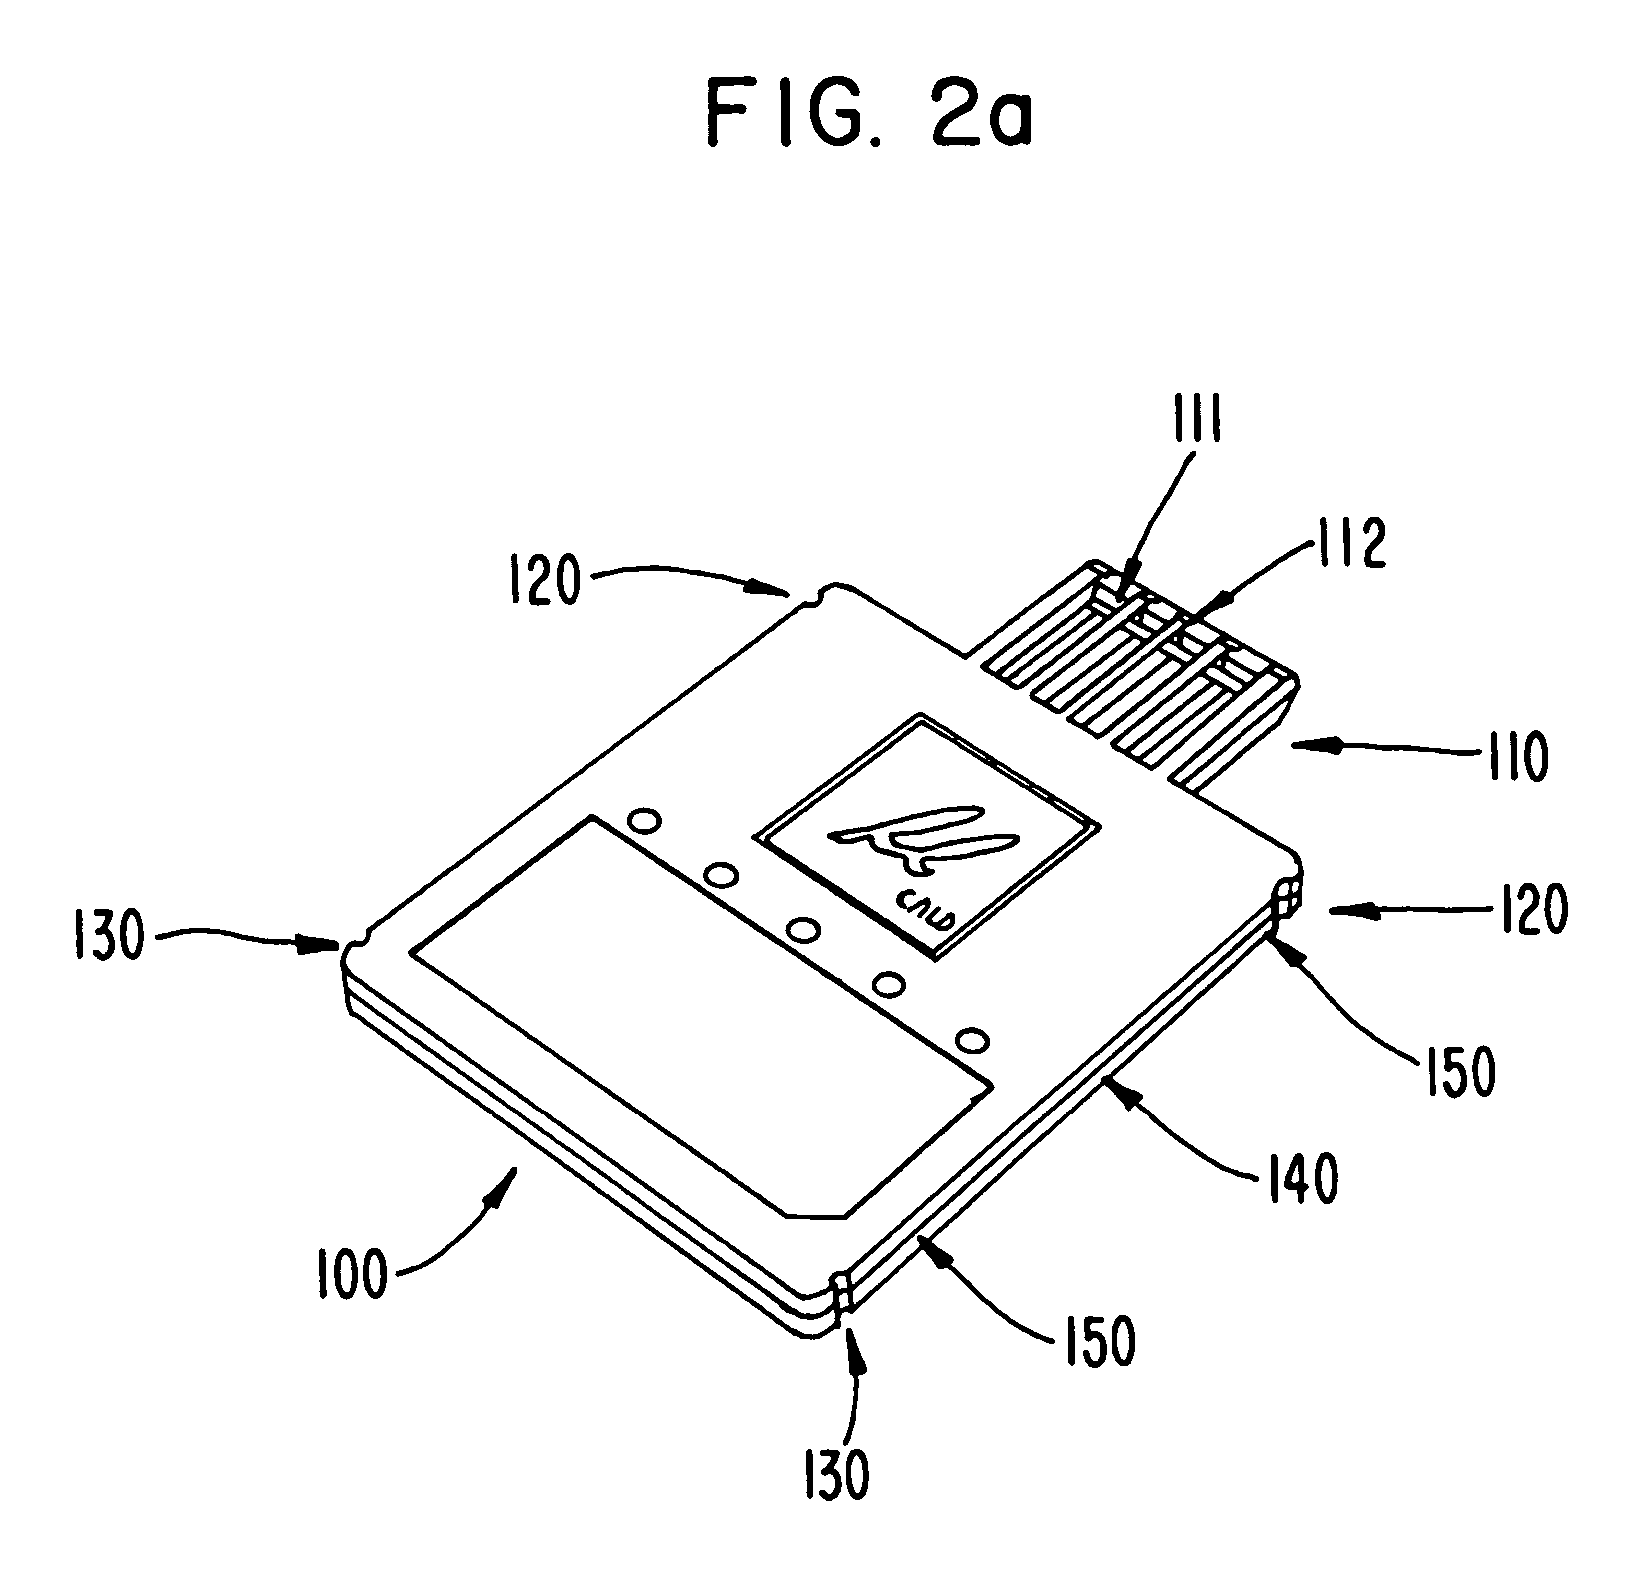 USB storage device including USB plug with top and bottom terminals